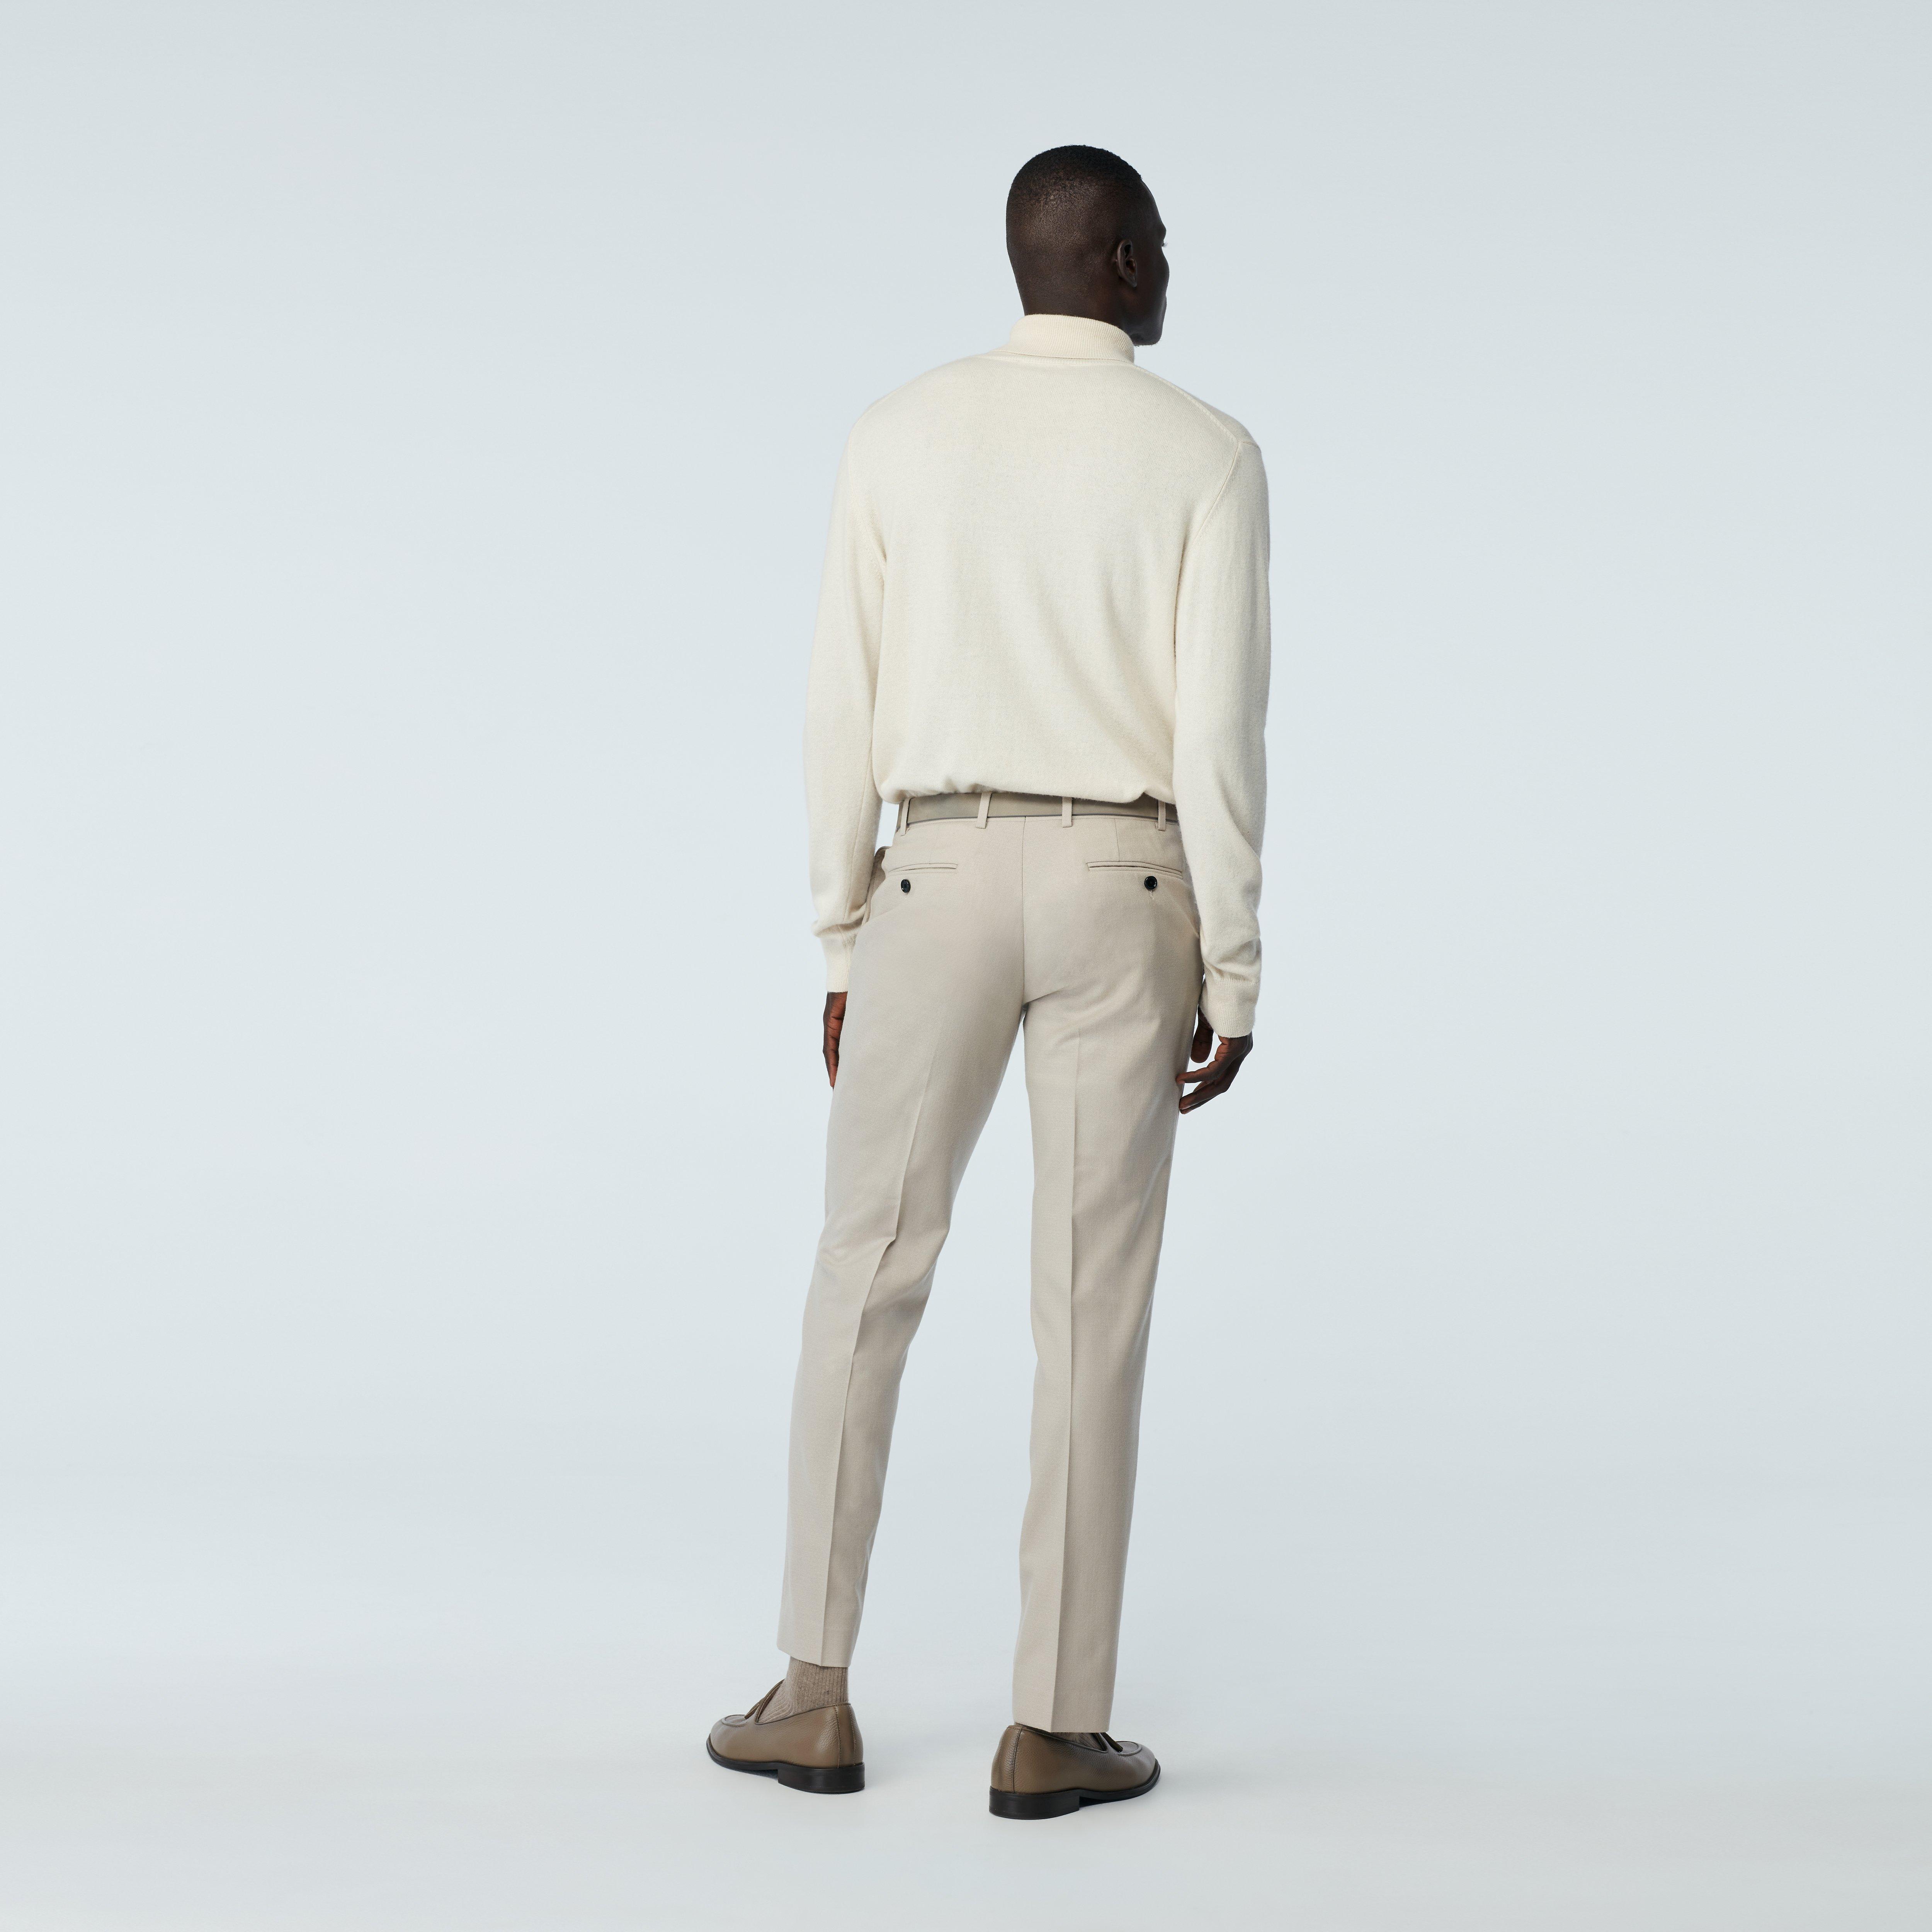 Custom Suits Made For You - Monza Royal Flannel Cream Suit | INDOCHINO